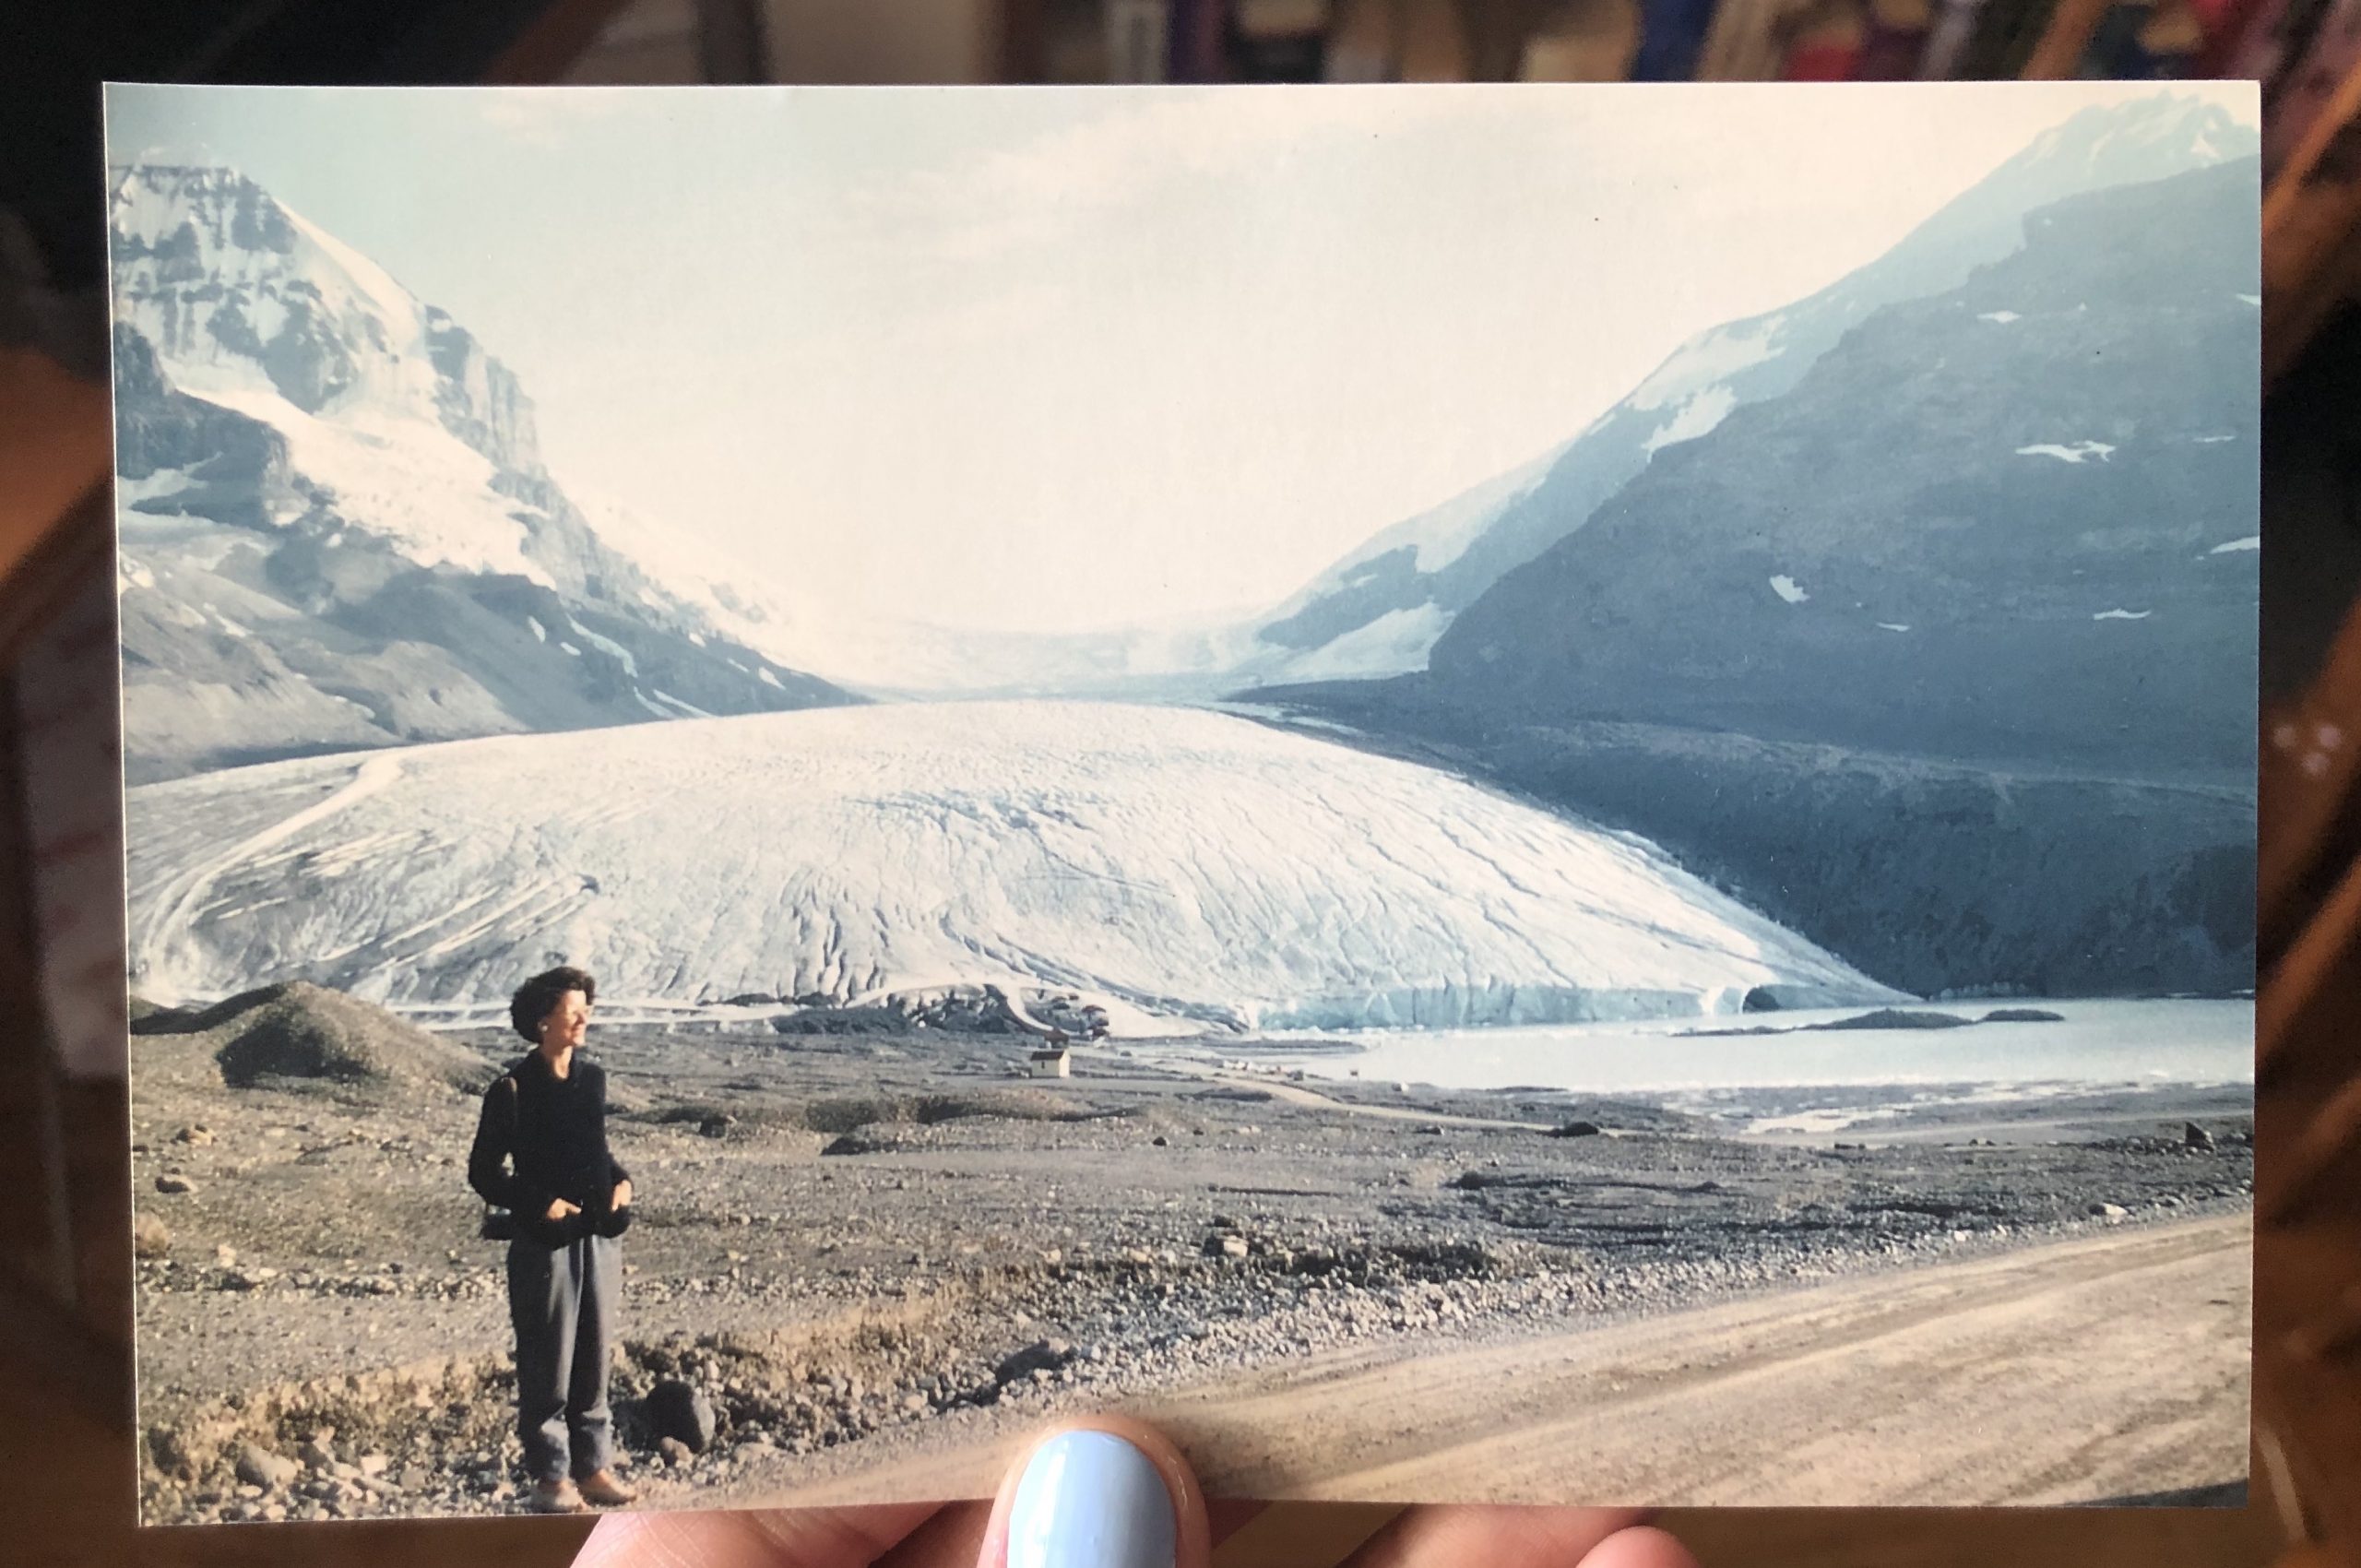 Athabasca Glacier and the Visualization Power of Photography